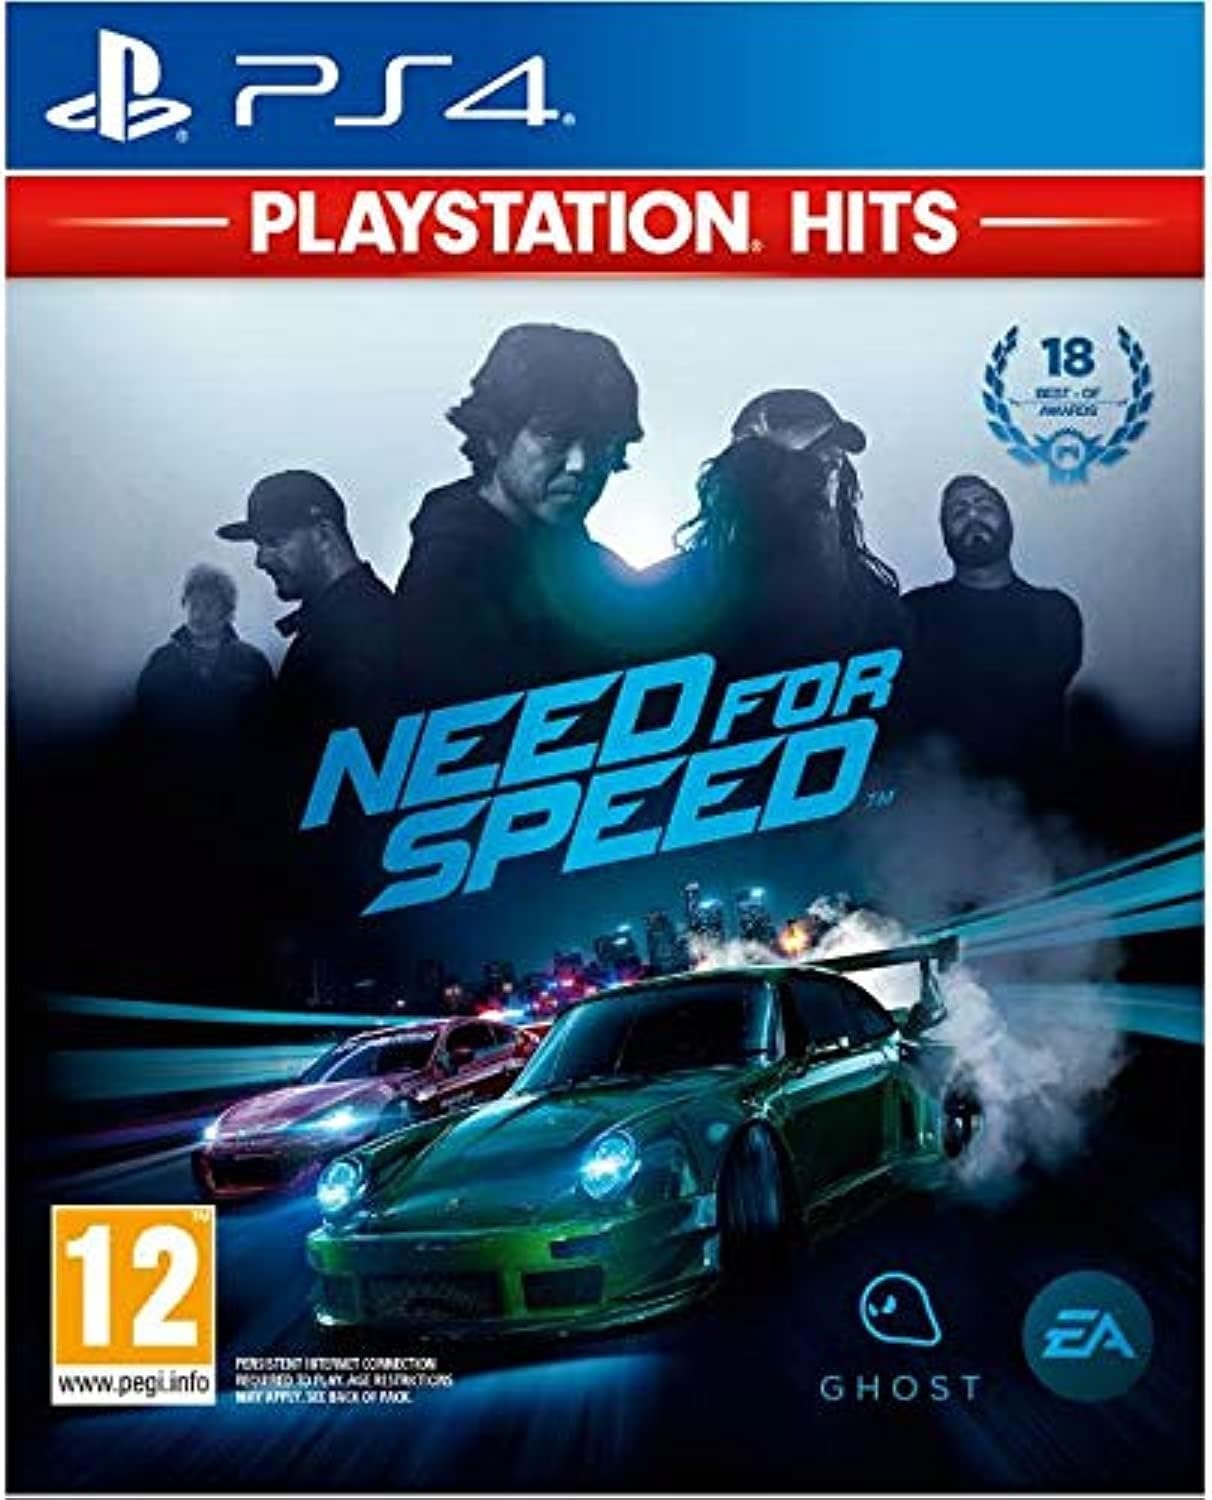 Need For Speed - Playstation 4 Title